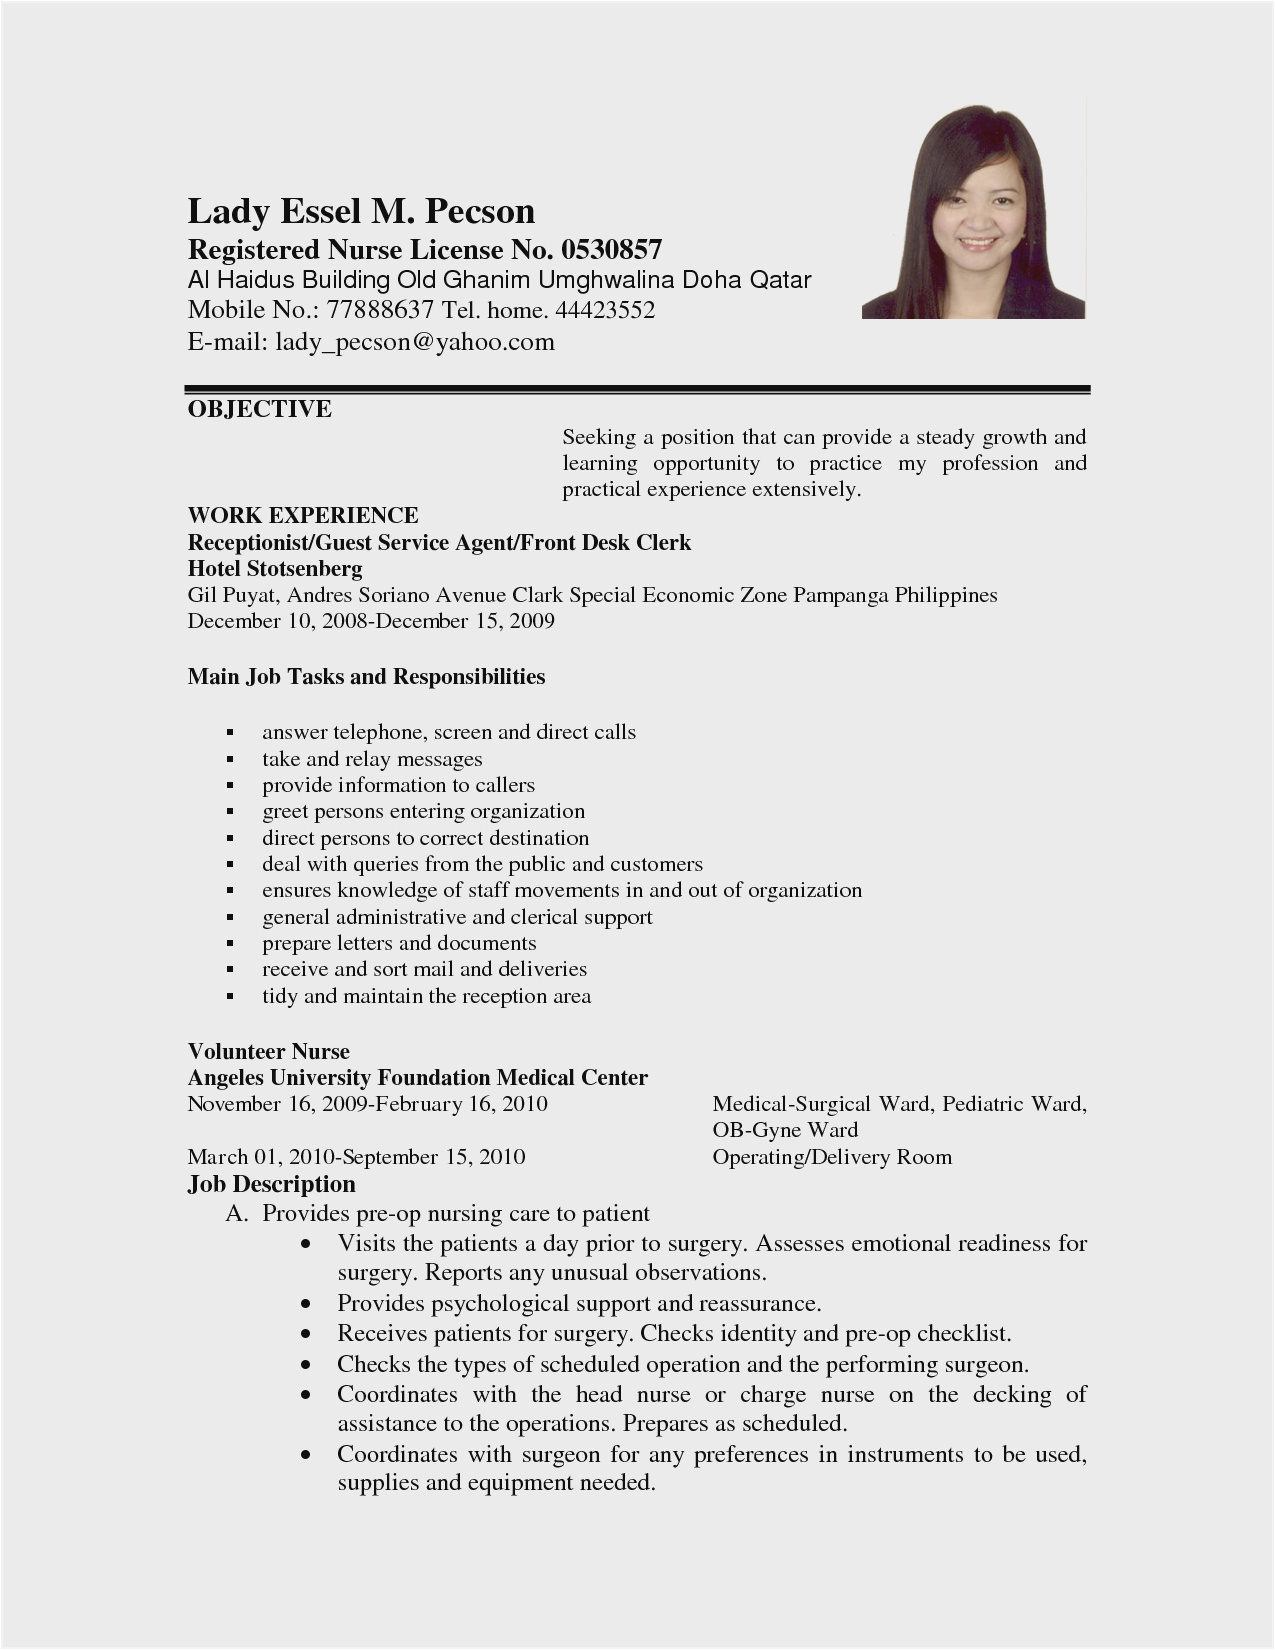 Sample Resume for Filipino Nurses Applying Abroad Call Center Sample Resume with No Experience Philippines